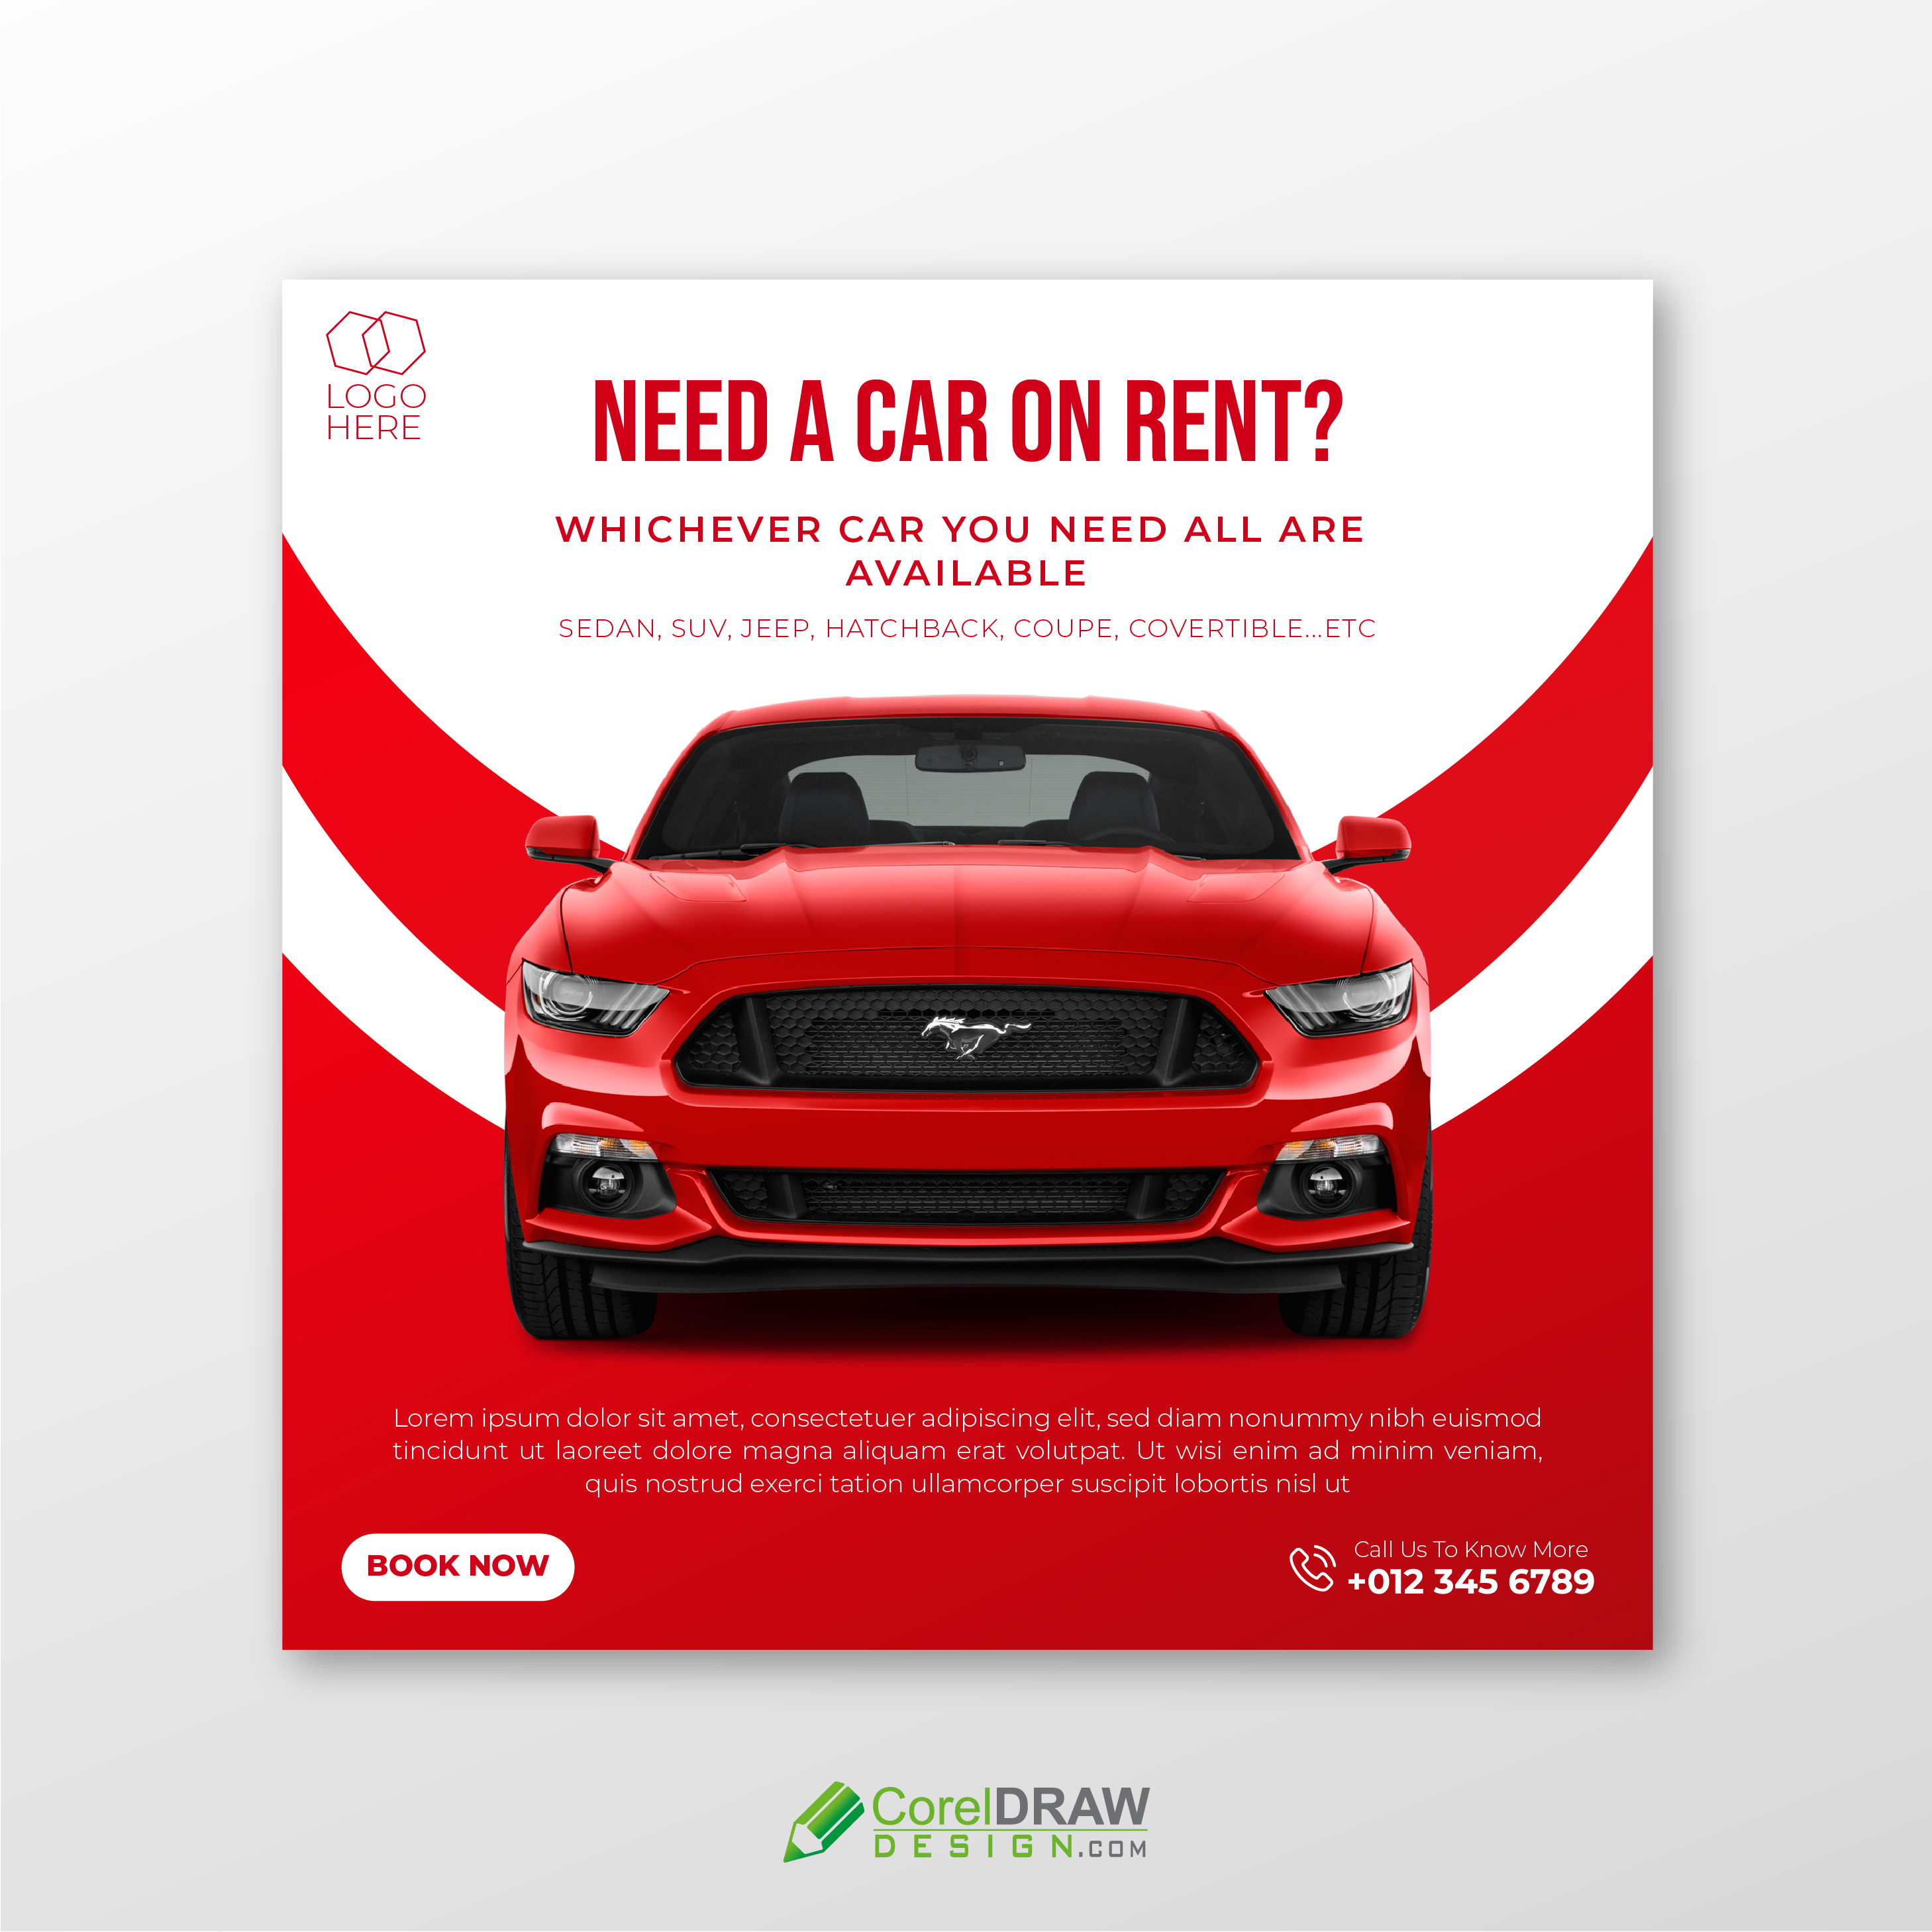 Abstract Red Car rental informational banner